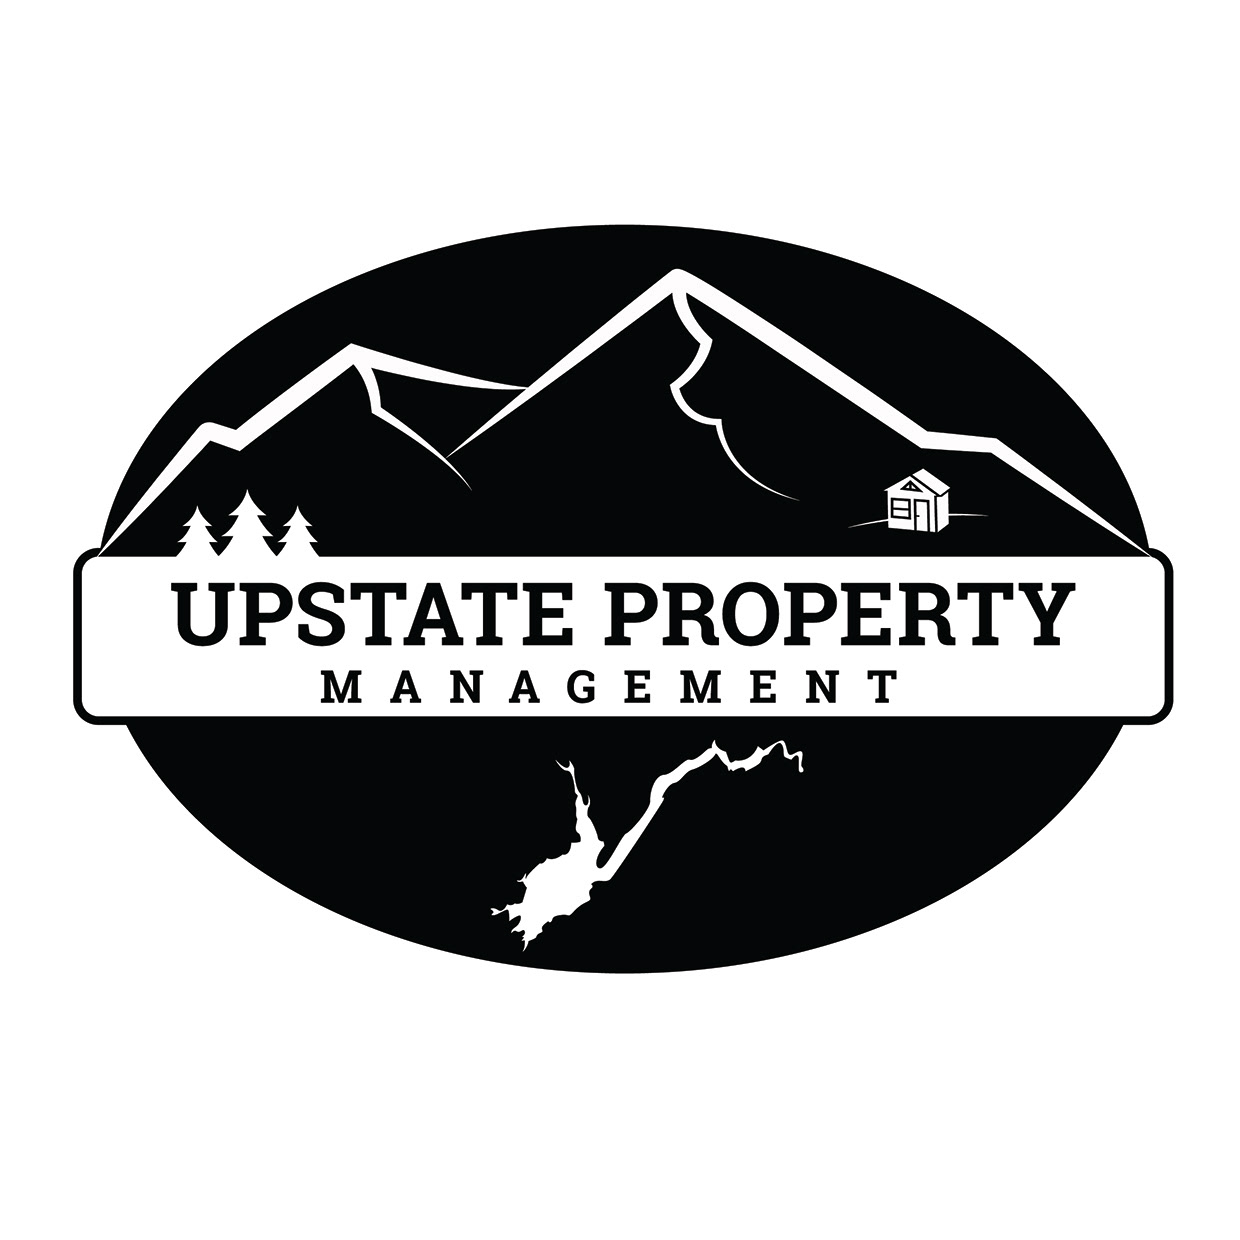 Upstate Property Management Logo and Business Cards on